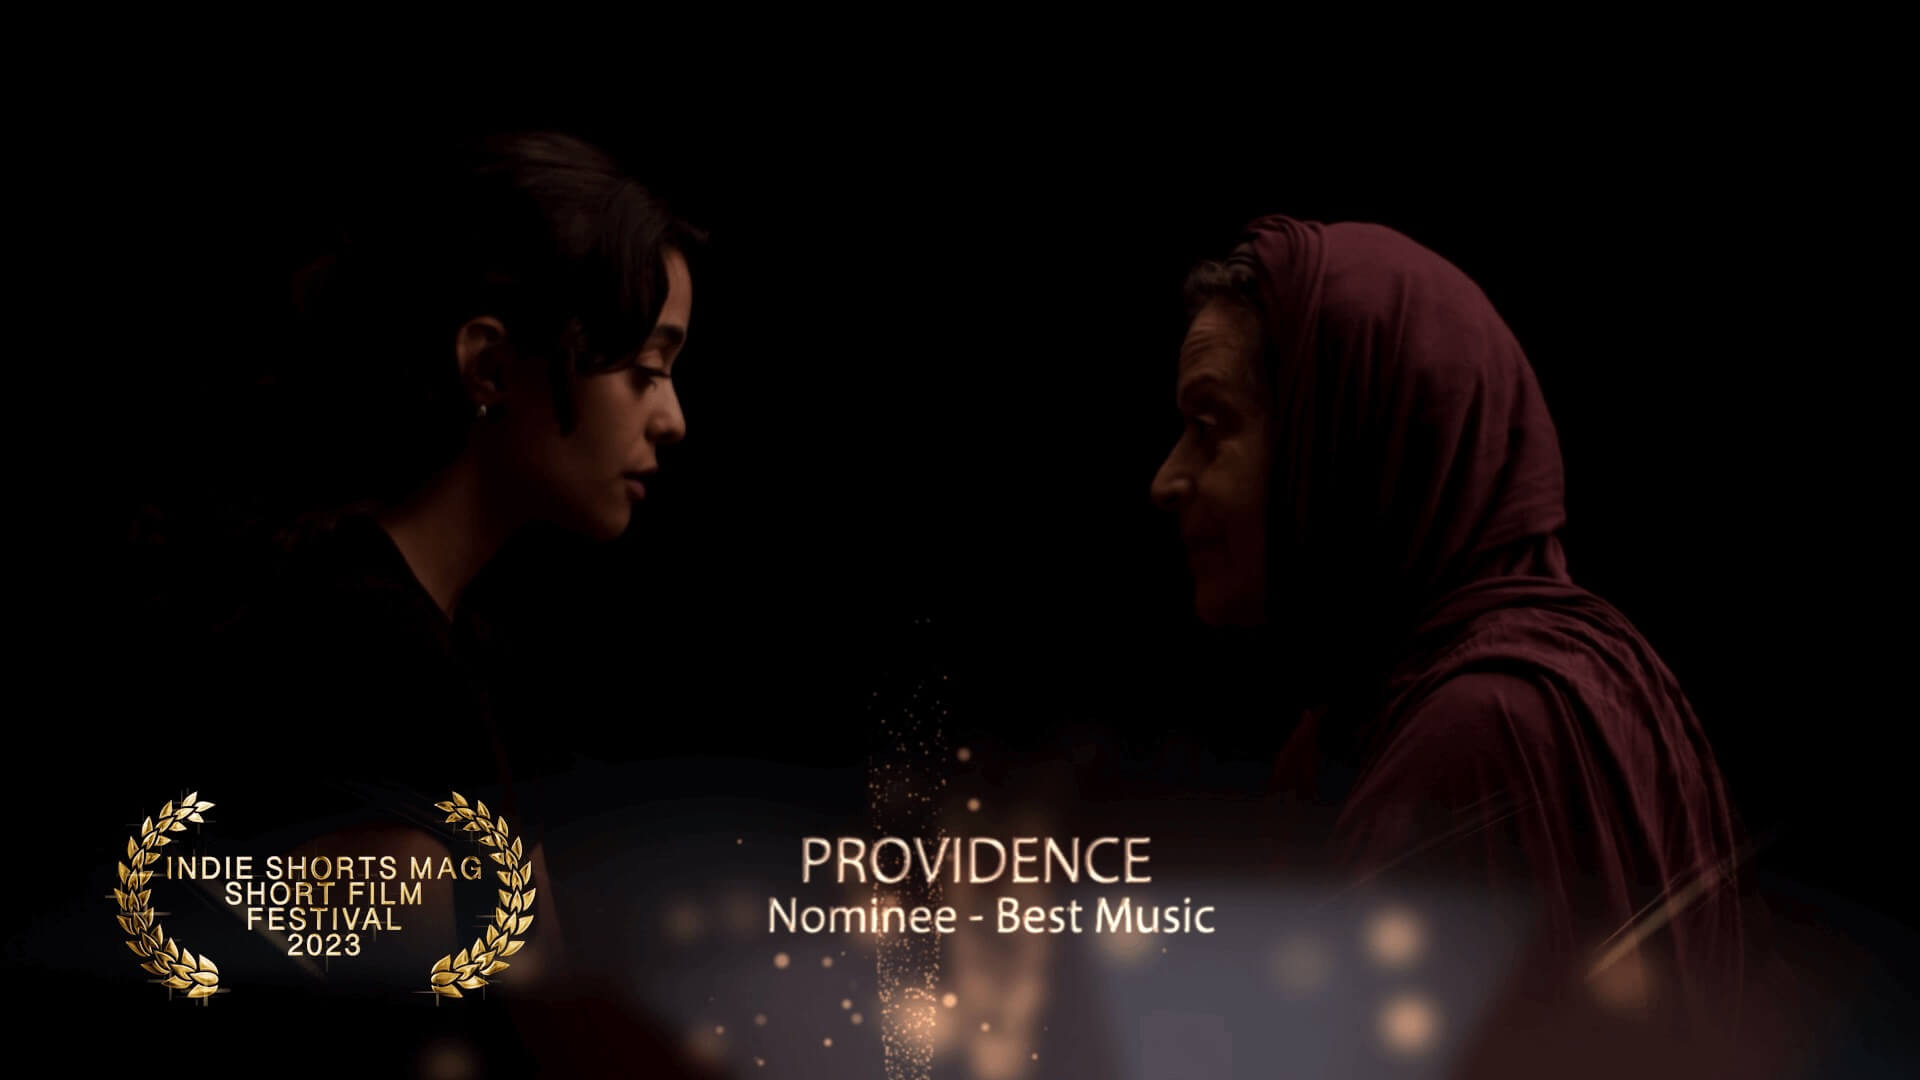 Indie Shorts Mag Short Film Festival - Best Music - Nominee - Providence